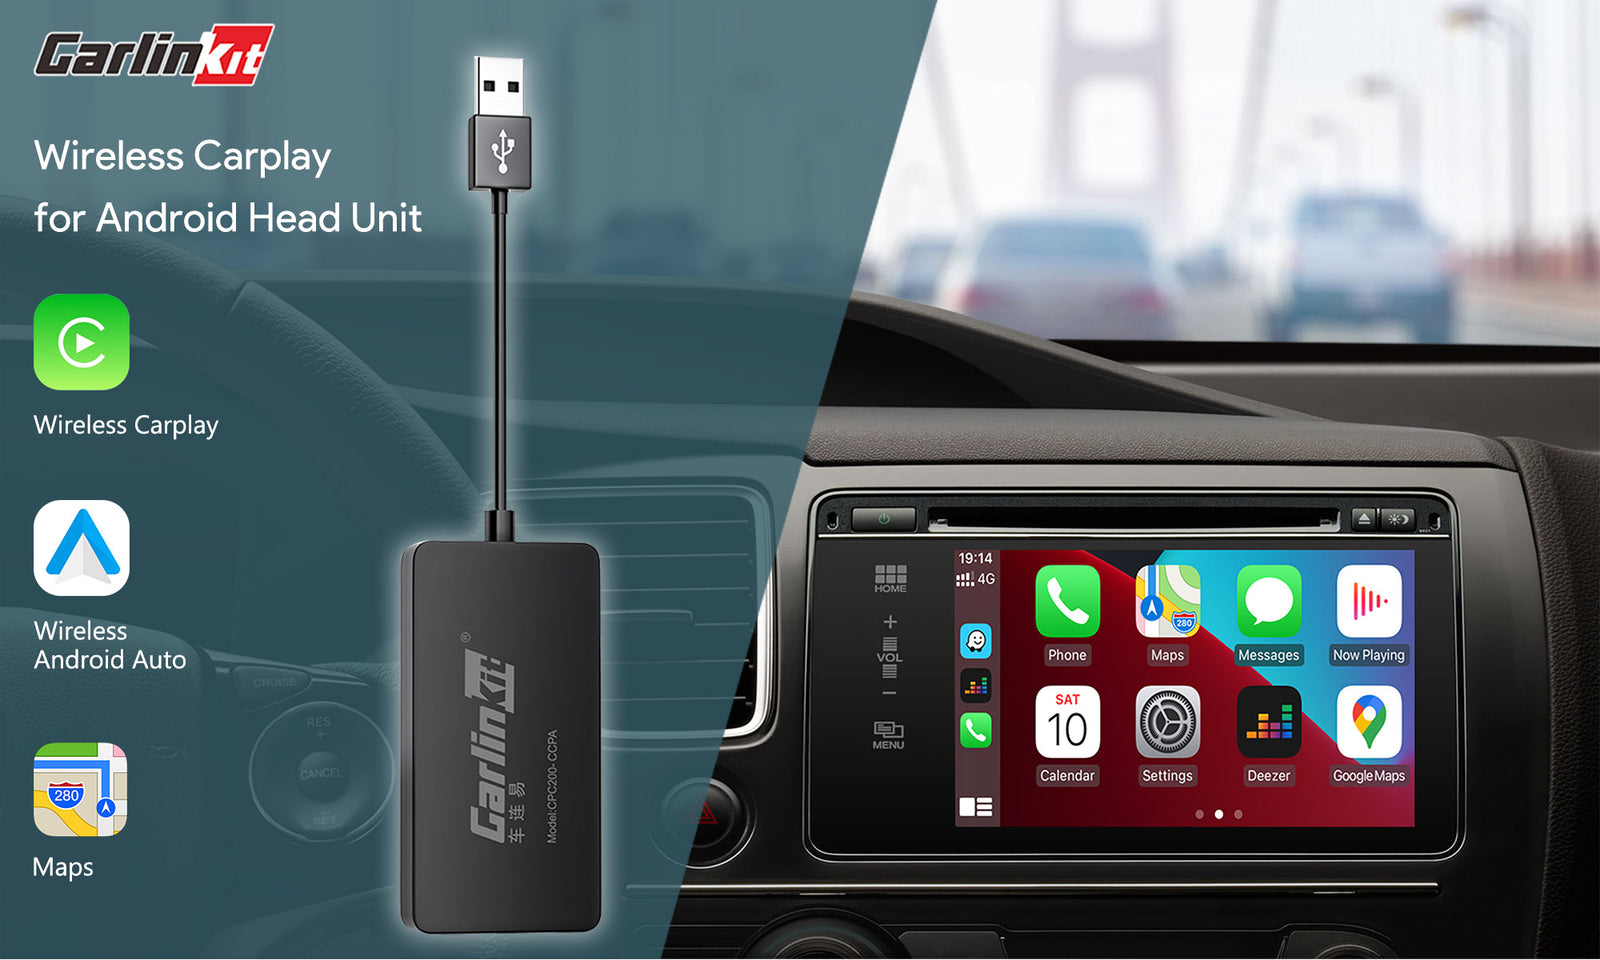 Uograde your car with the best CarPlay adapter available! The